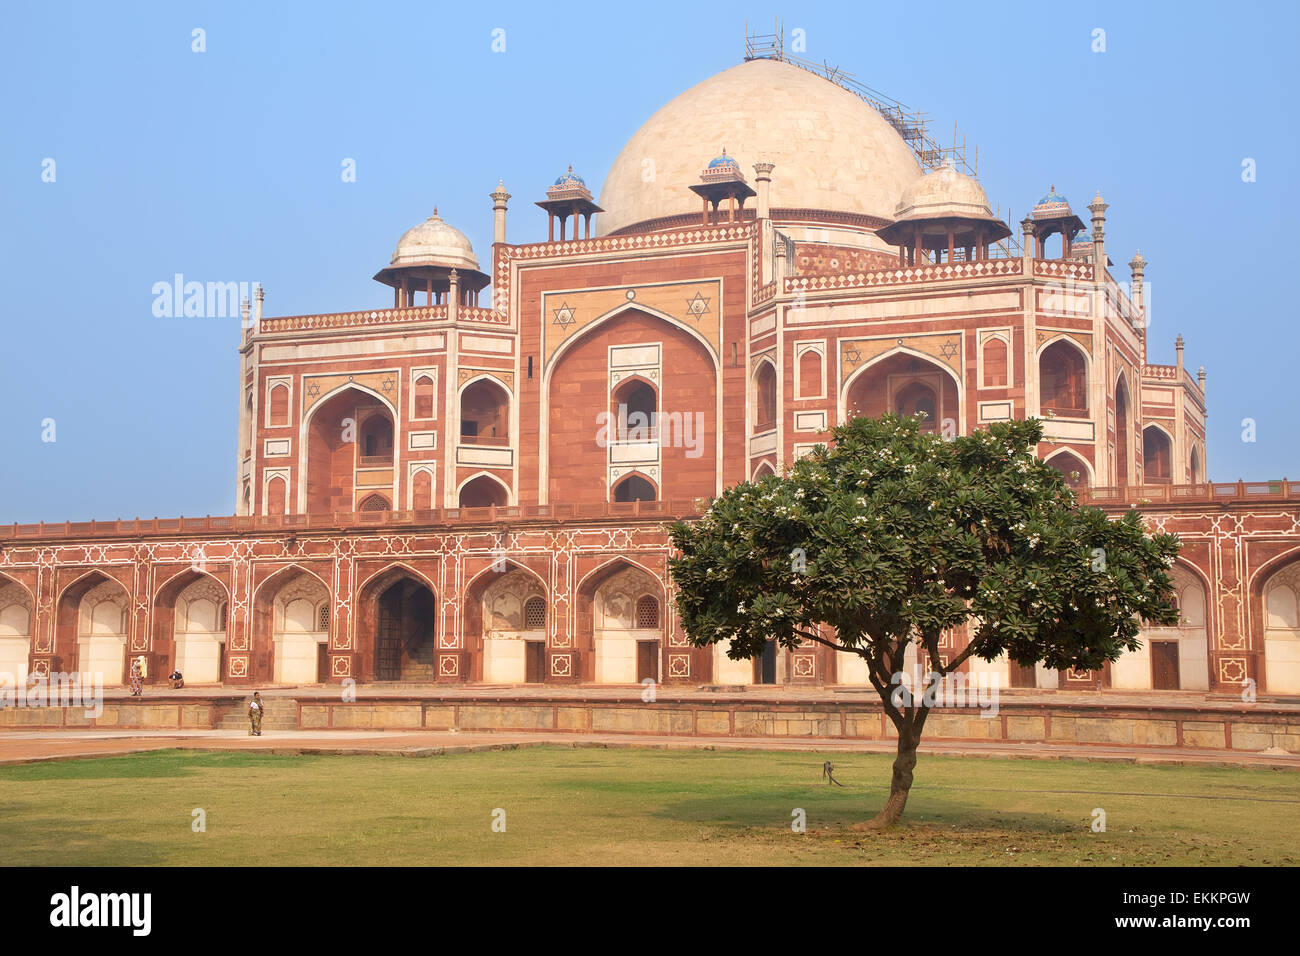 Humayun's Tomb, Delhi, India. It was the first garden-tomb on the Indian subcontinent. Stock Photo